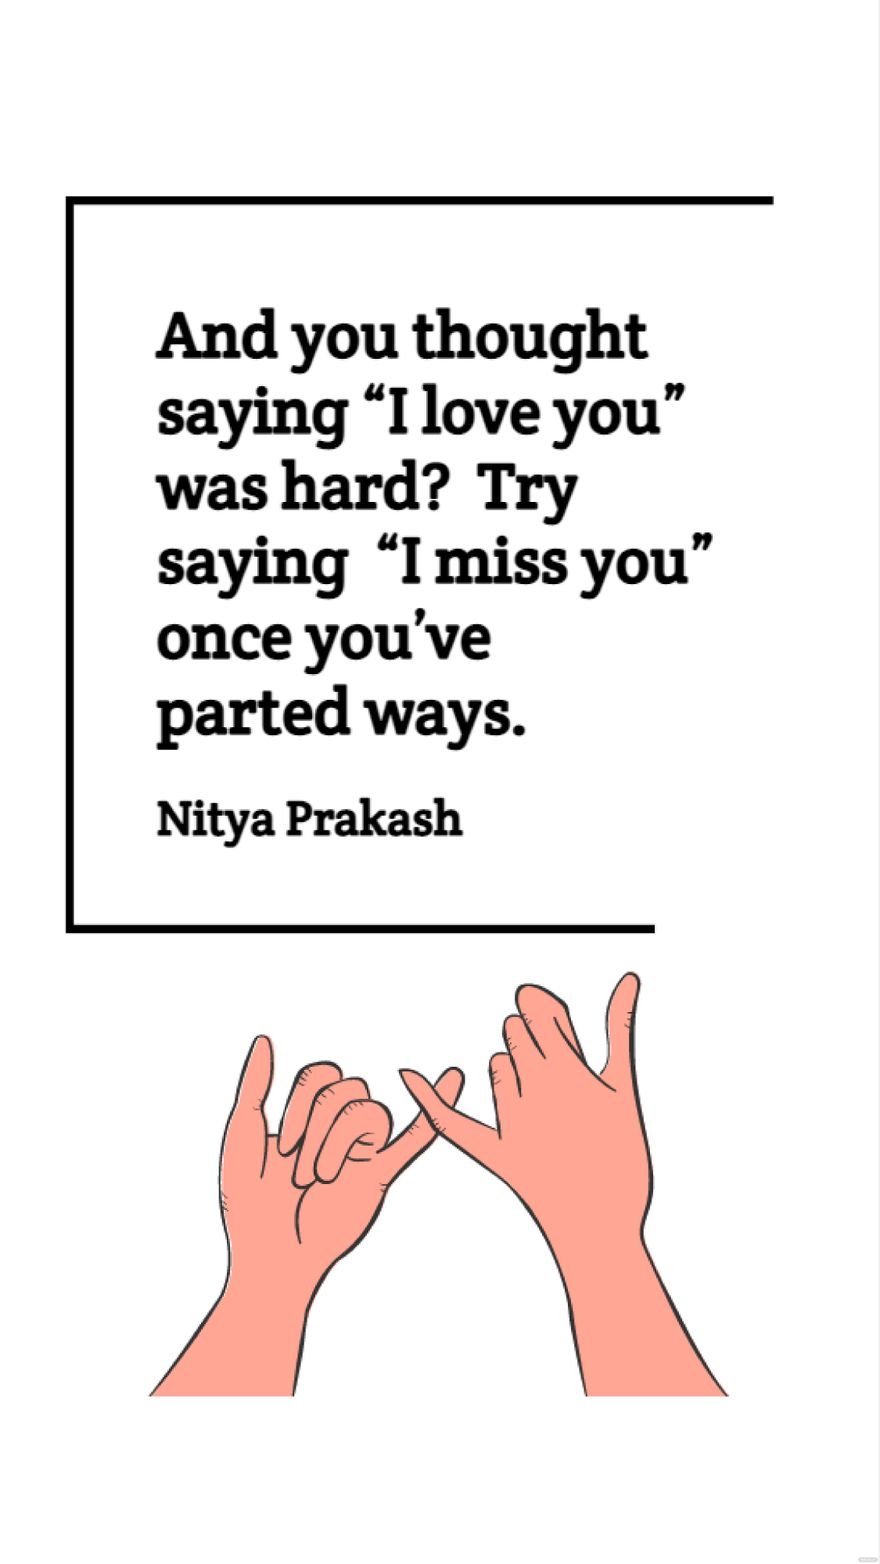 Nitya Prakash - And you thought saying “I love you” was hard? Try saying “I miss you” once you’ve parted ways.